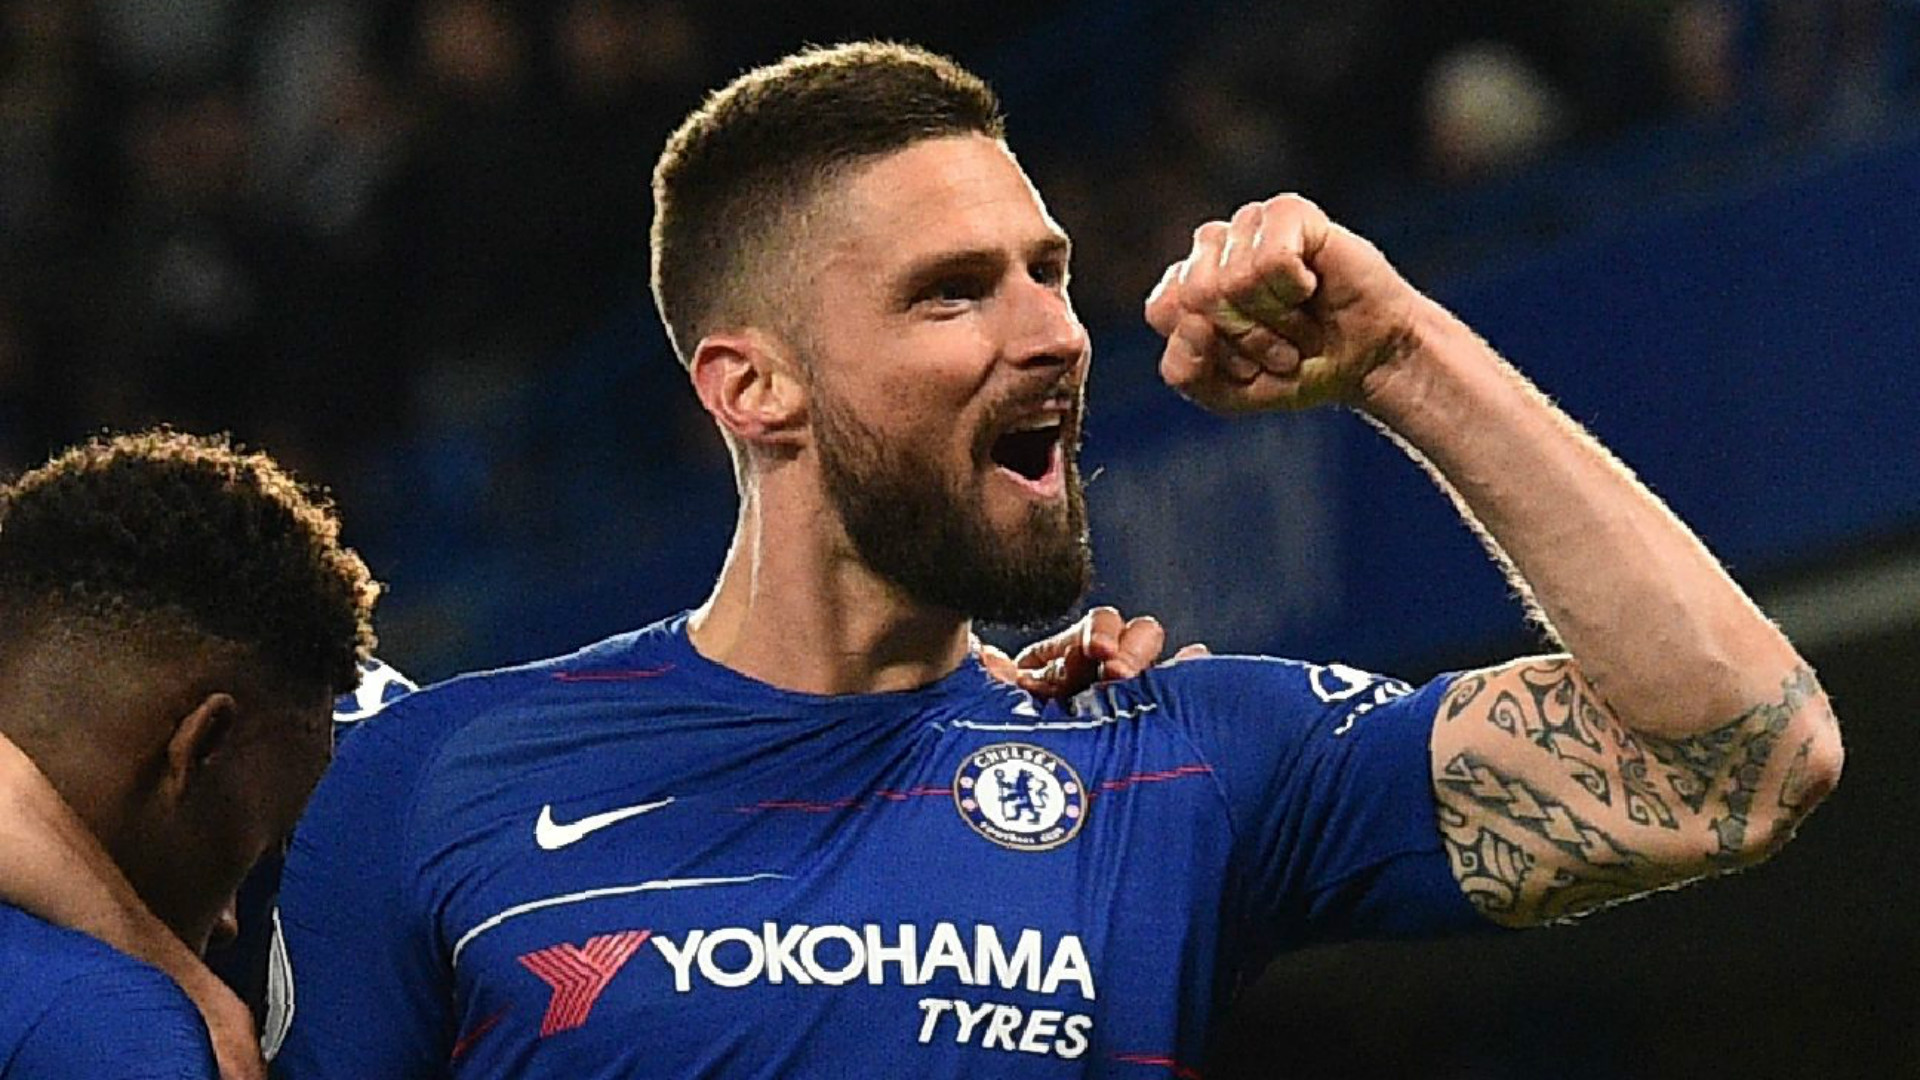 Chelsea transfer news: Olivier Giroud to stay at Stamford Bridge as one